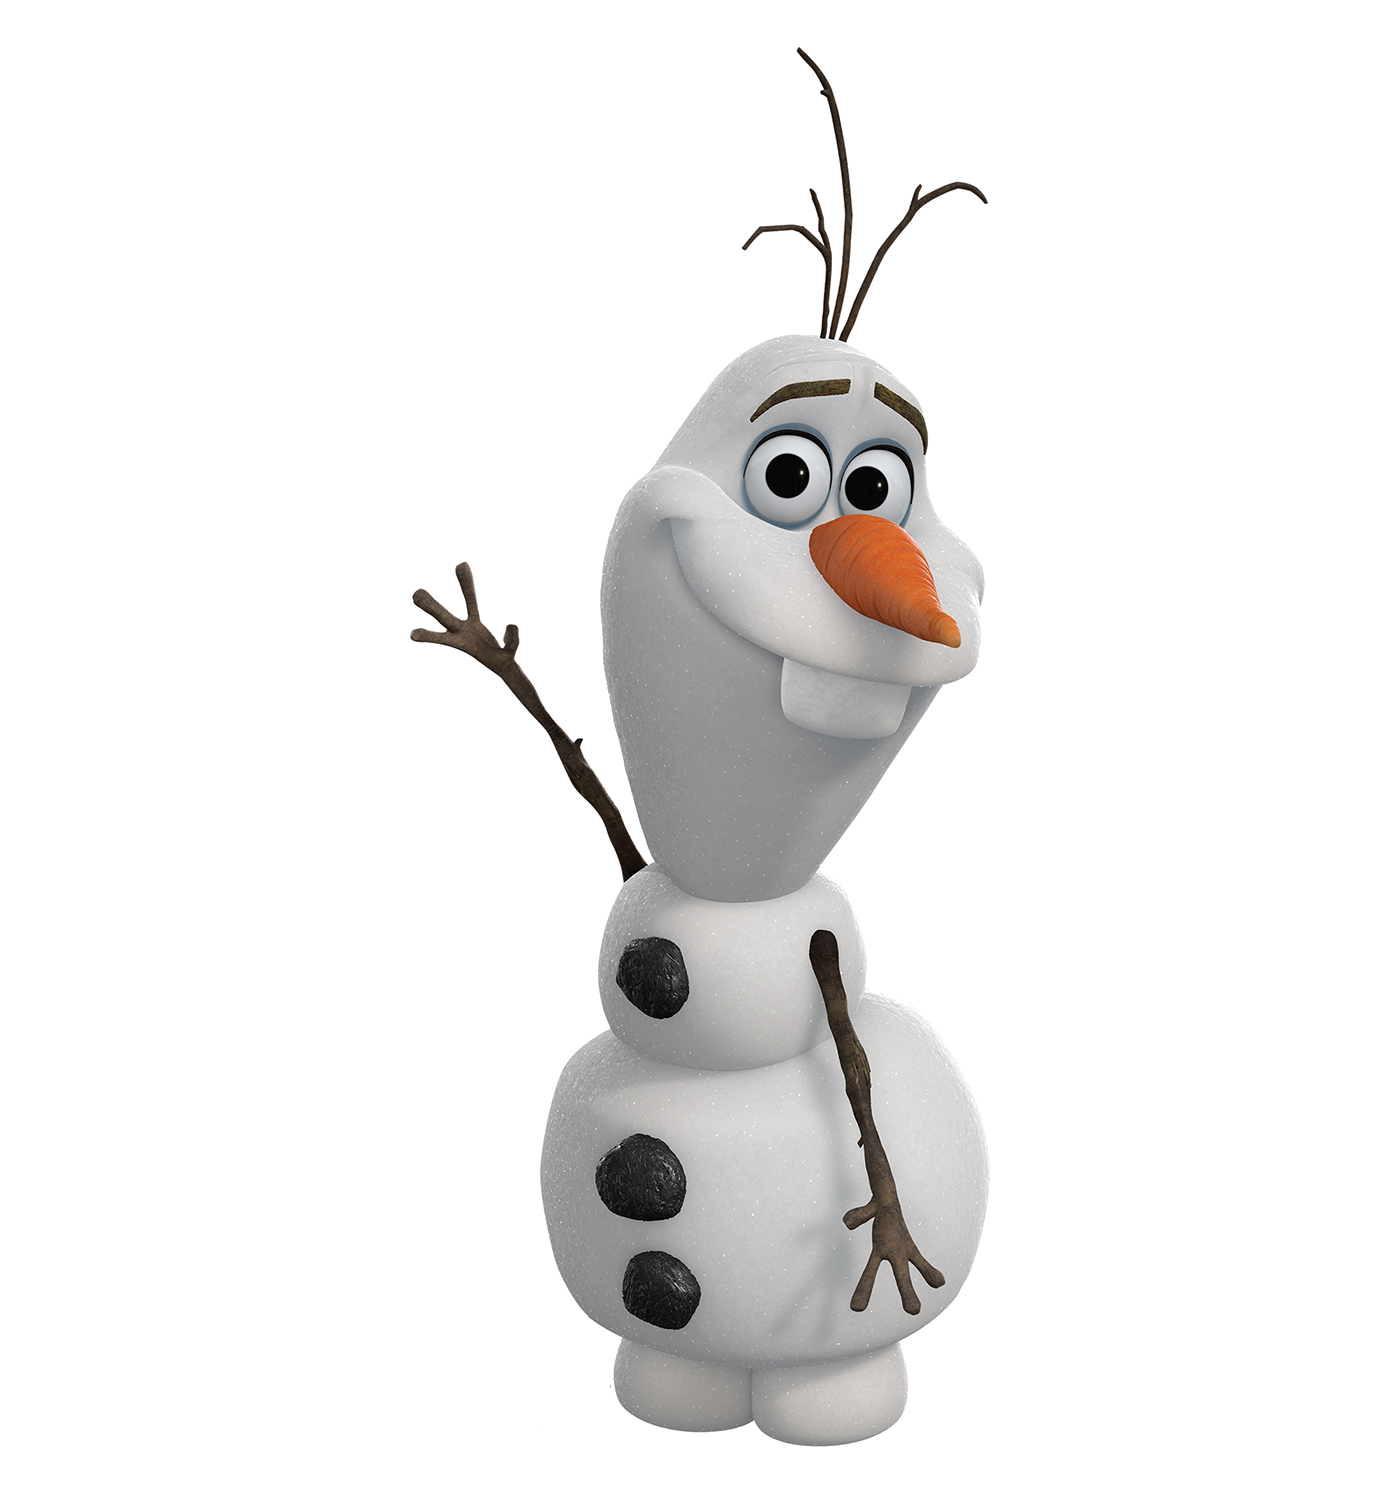 Frozen Free HQ Image PNG Image